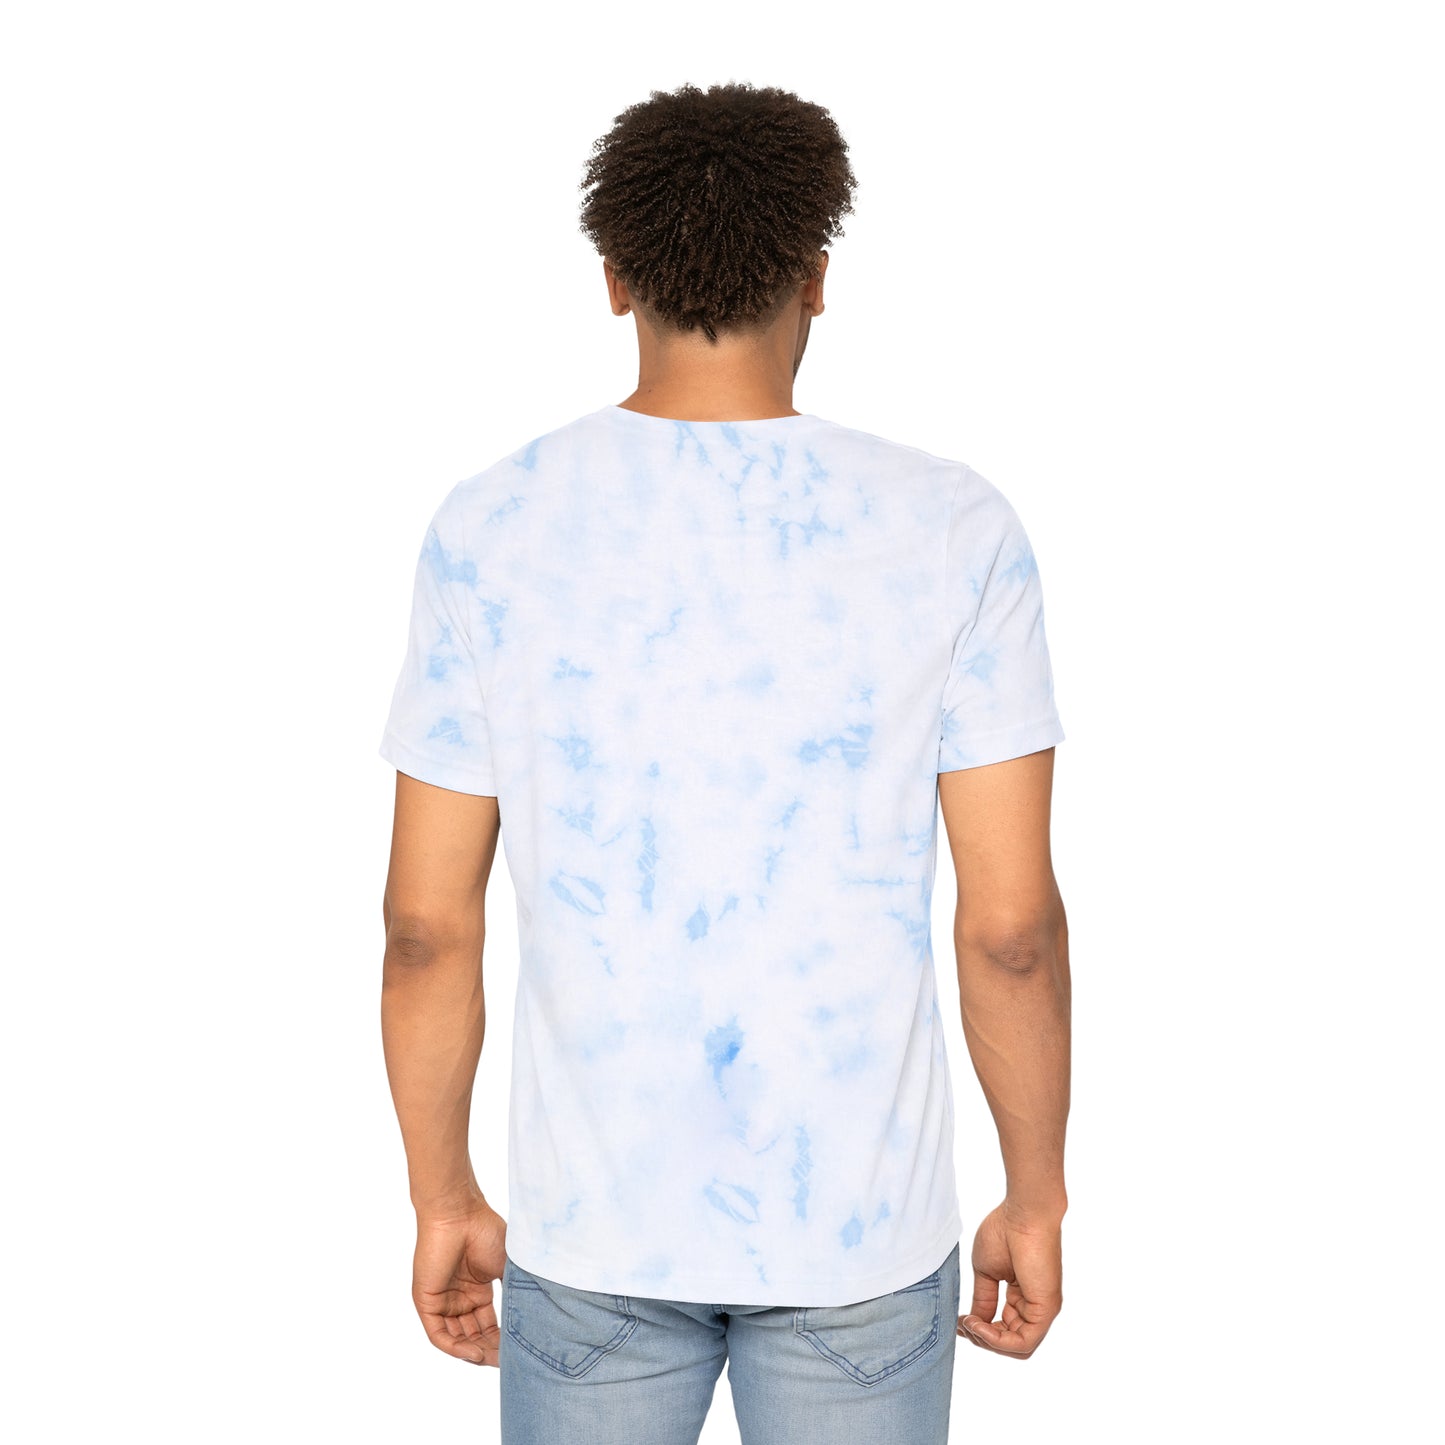 FOOD FOREST Unisex FWD Fashion Tie-Dyed T-Shirt